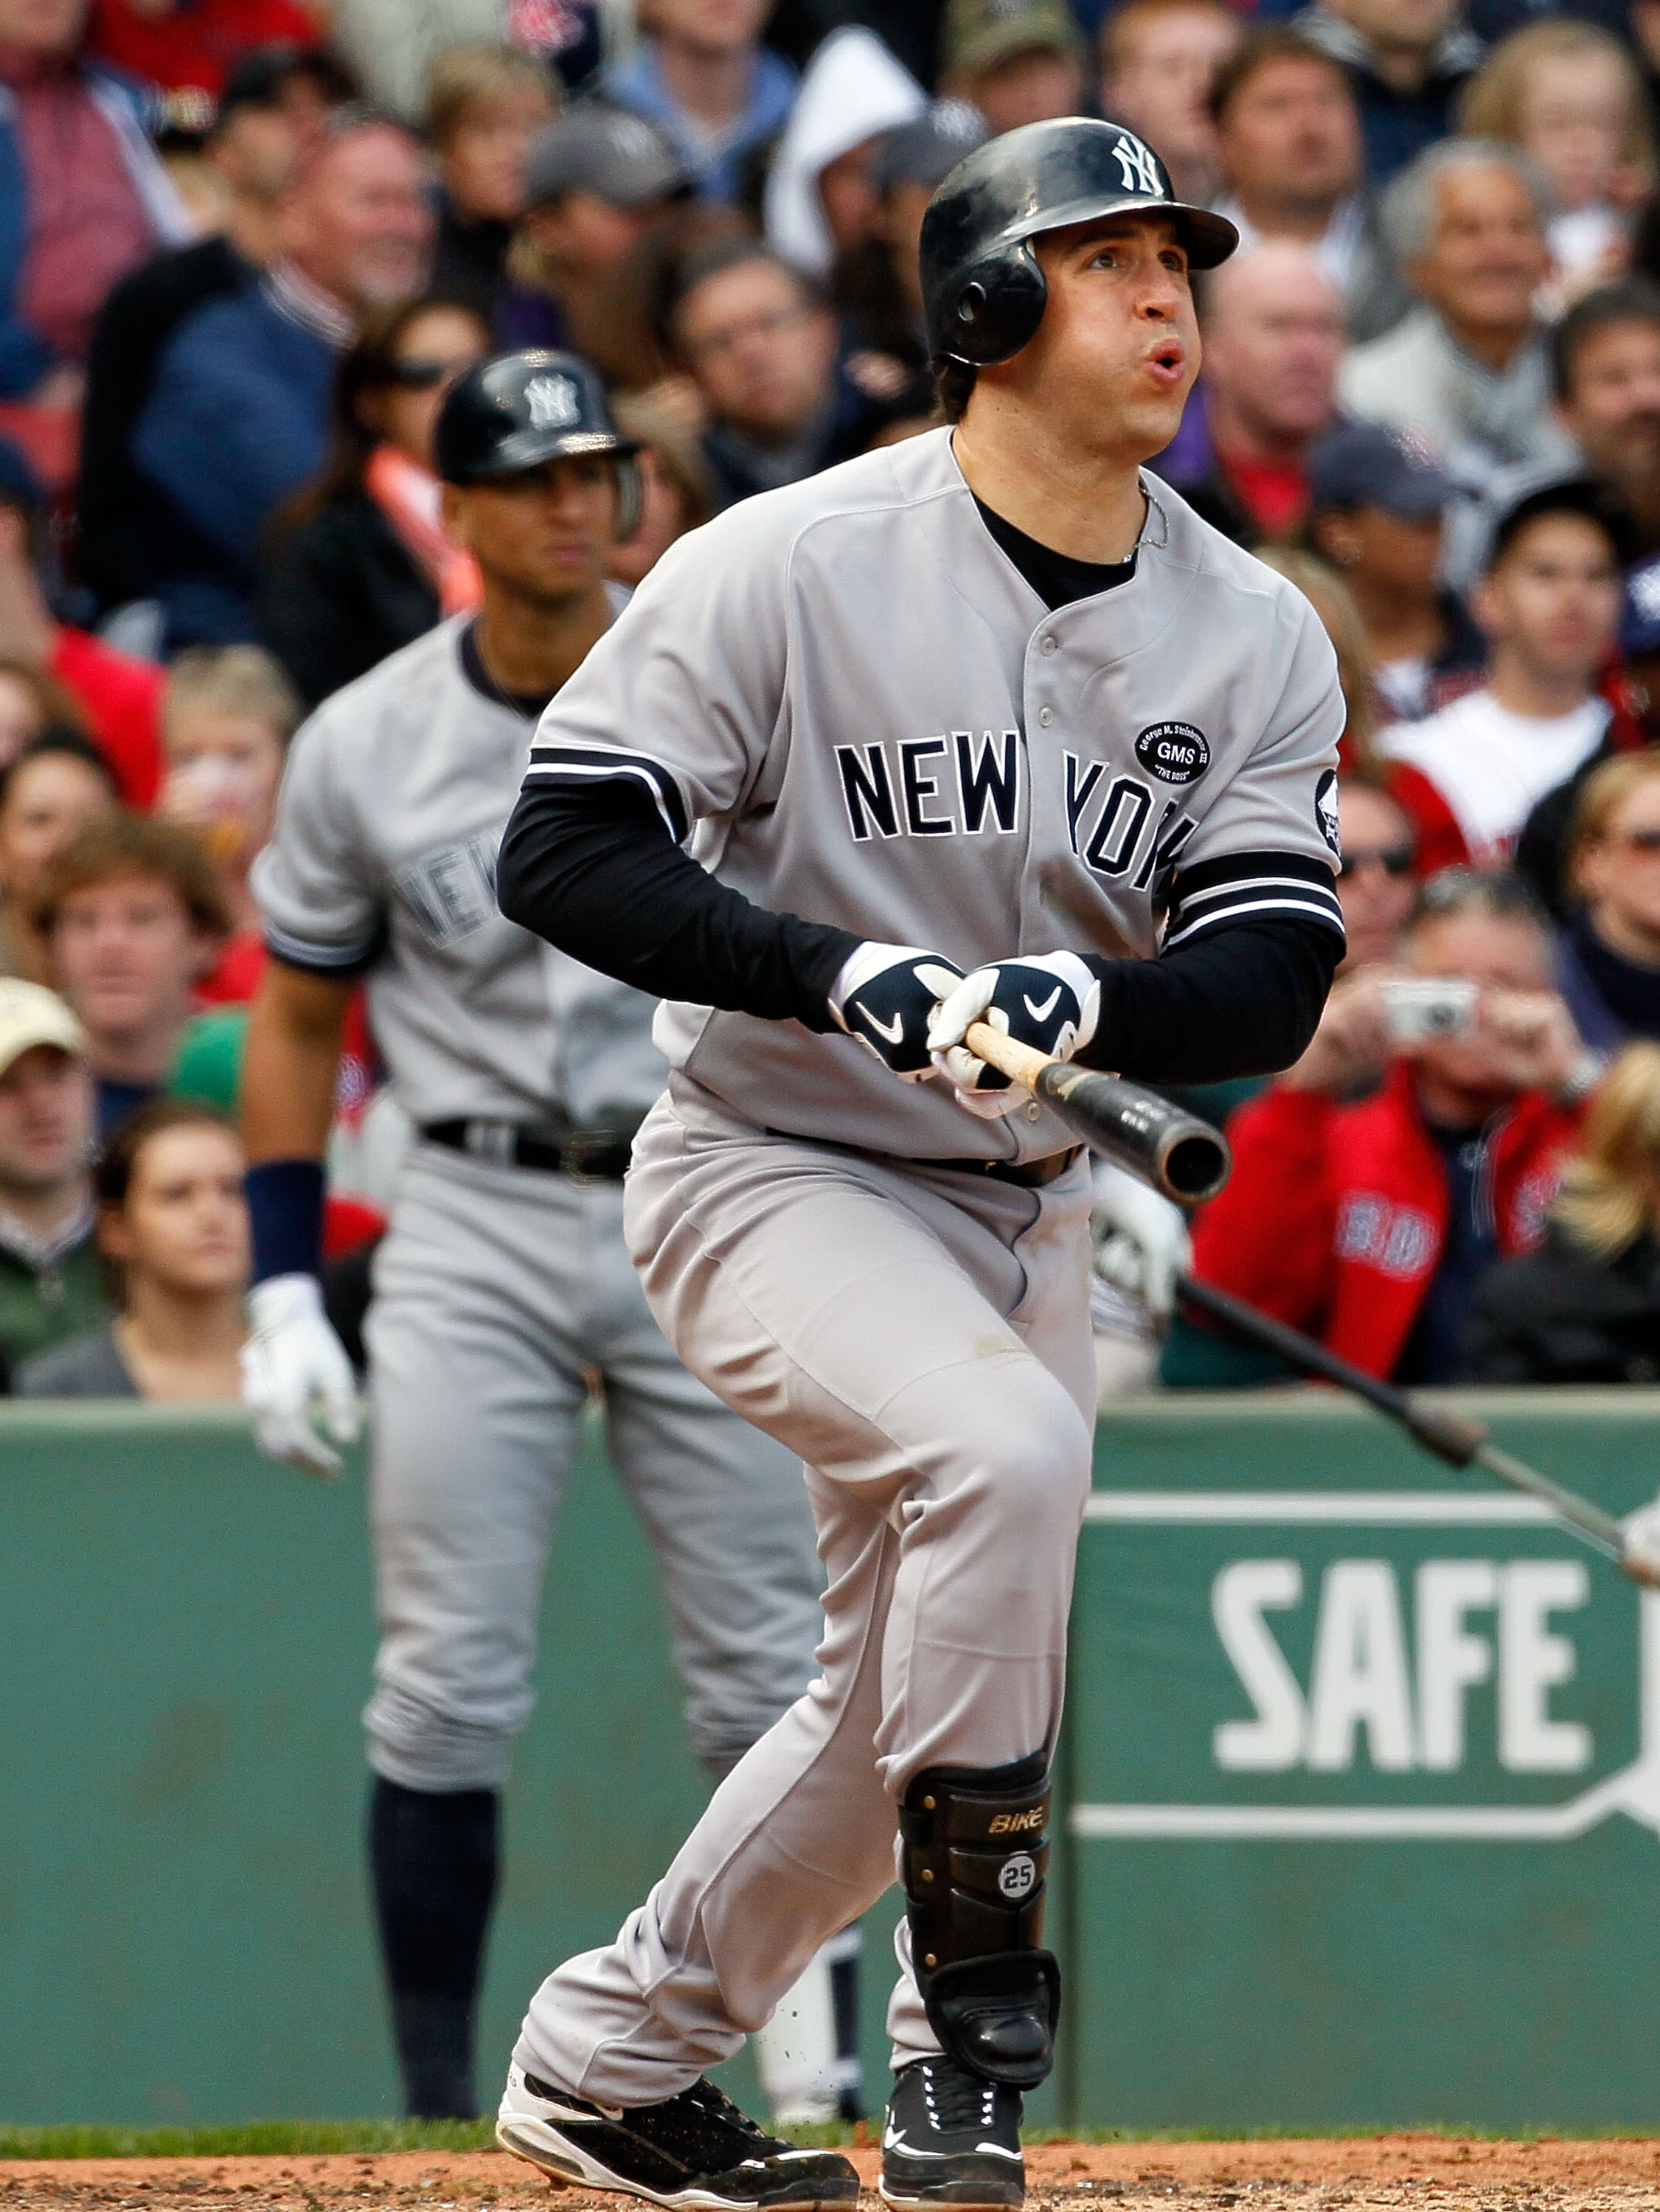 BOSTON - OCTOBER 3:  Mark Teixeira #25 of the New York Yankees watches the flight of a hit ball against the Boston Red Sox at Fenway Park October 3, 2010 in Boston, Massachusetts. (Photo by Jim Rogash/Getty Images)